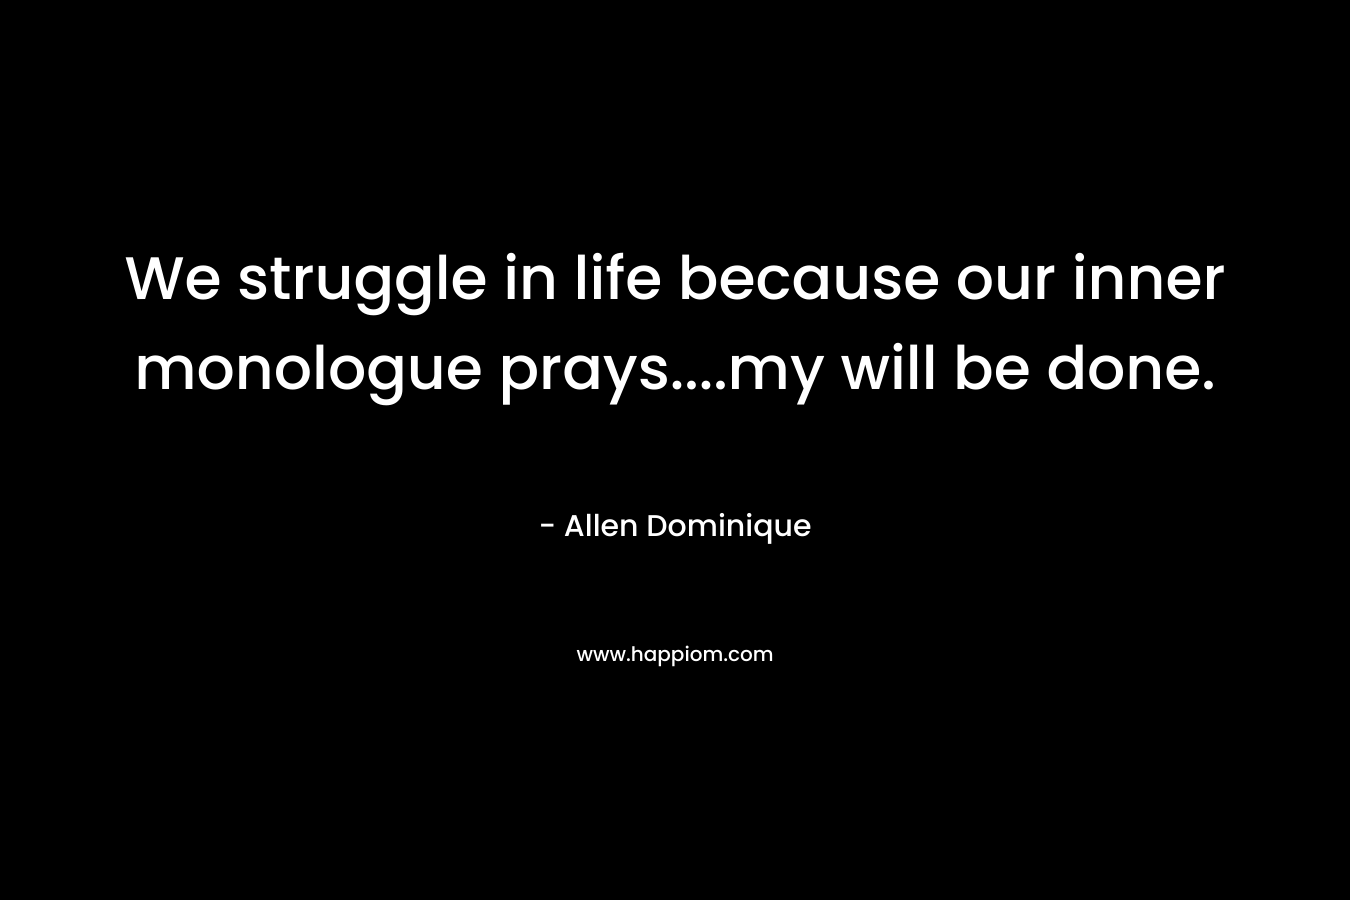 We struggle in life because our inner monologue prays....my will be done.